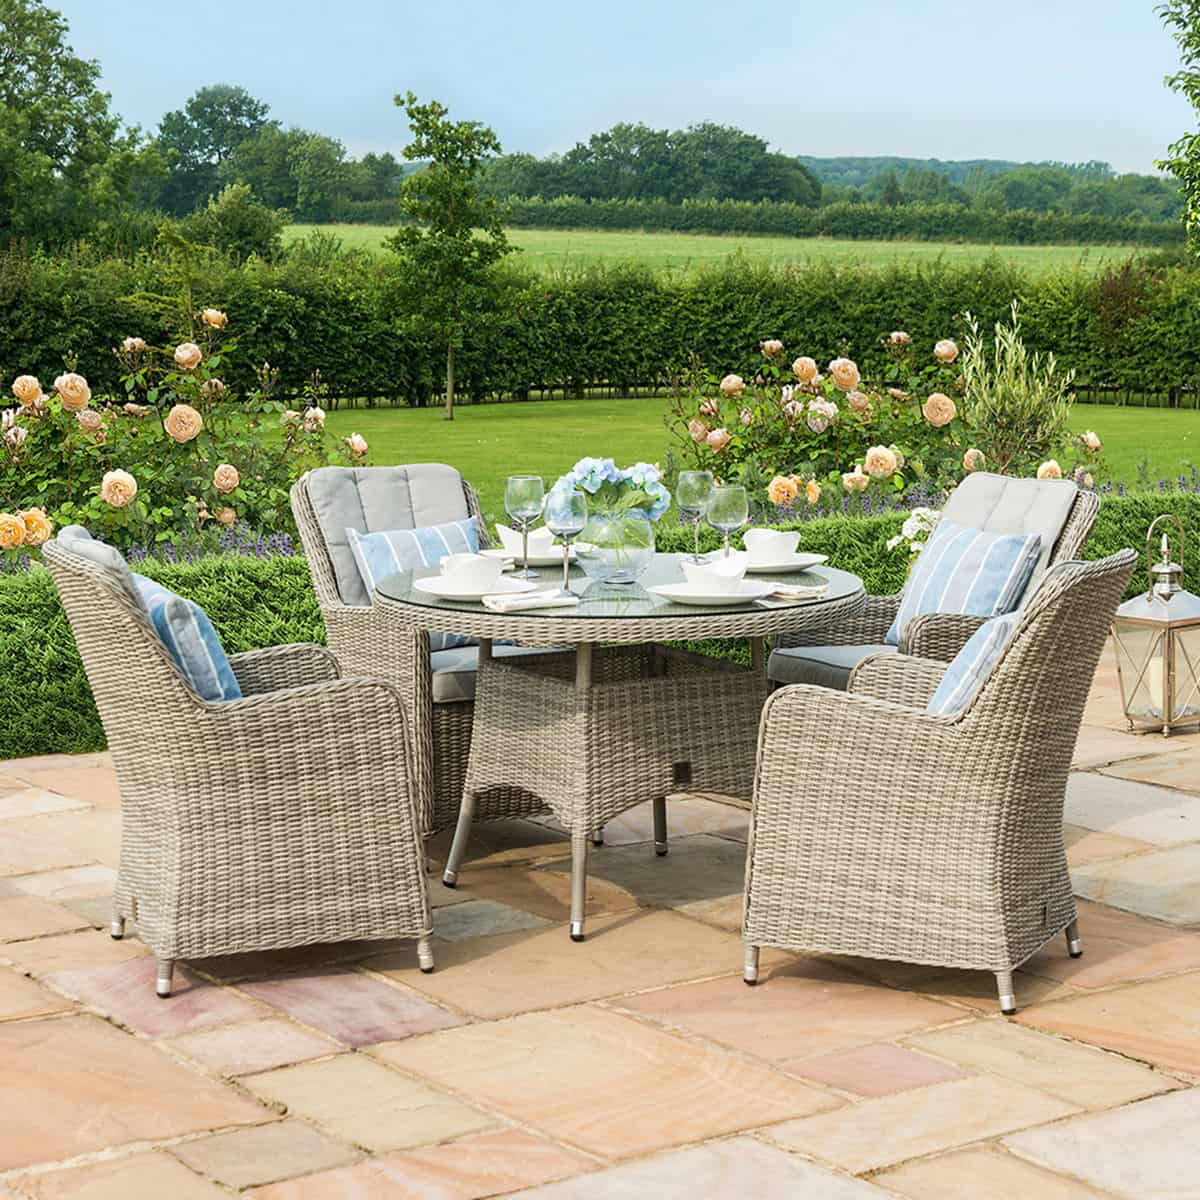 Light grey rattan 4 seat round dining set with Venice chairs